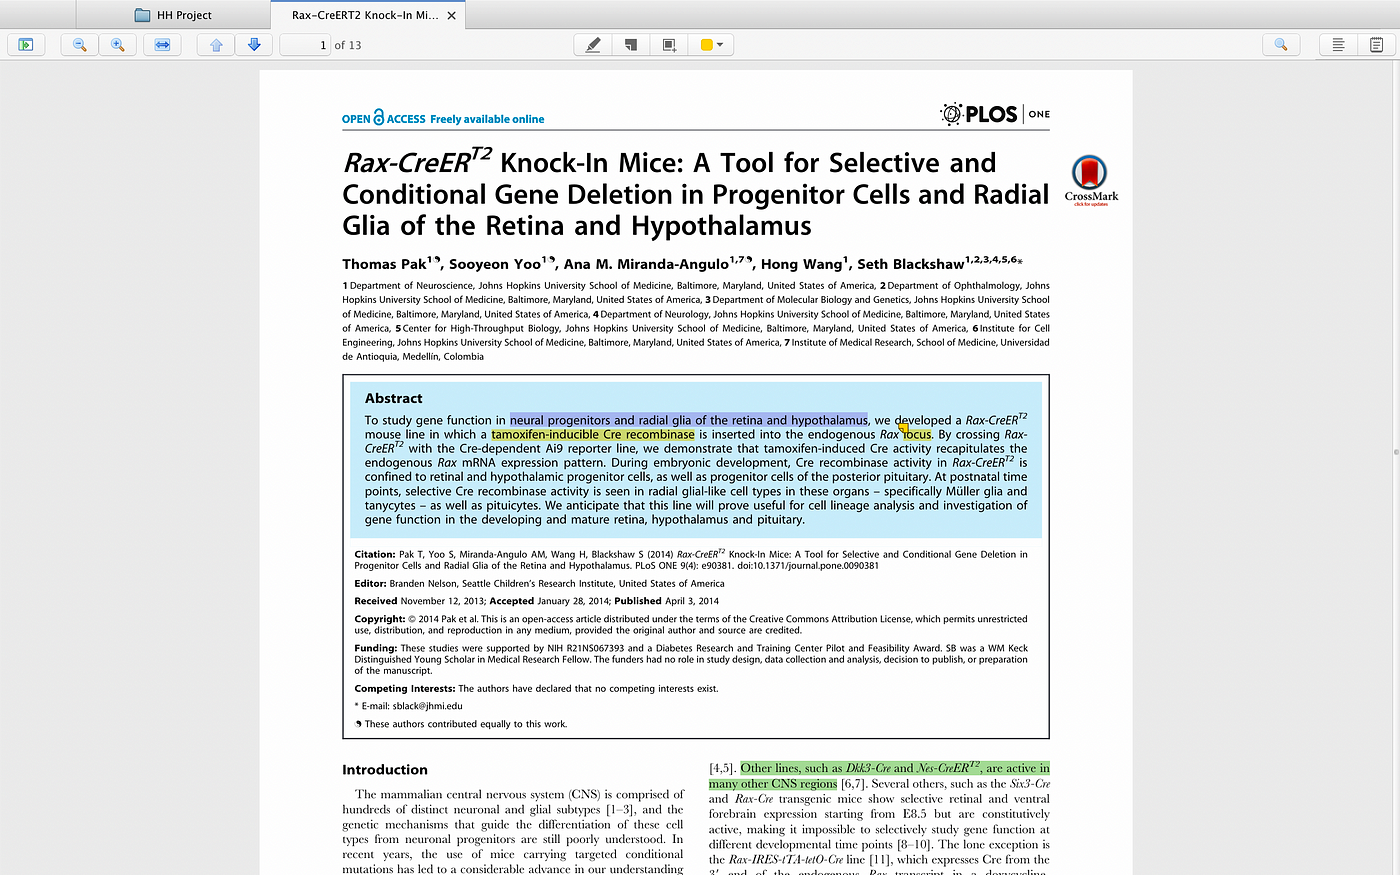 How I read, annotate, & organize research papers using Zotero +